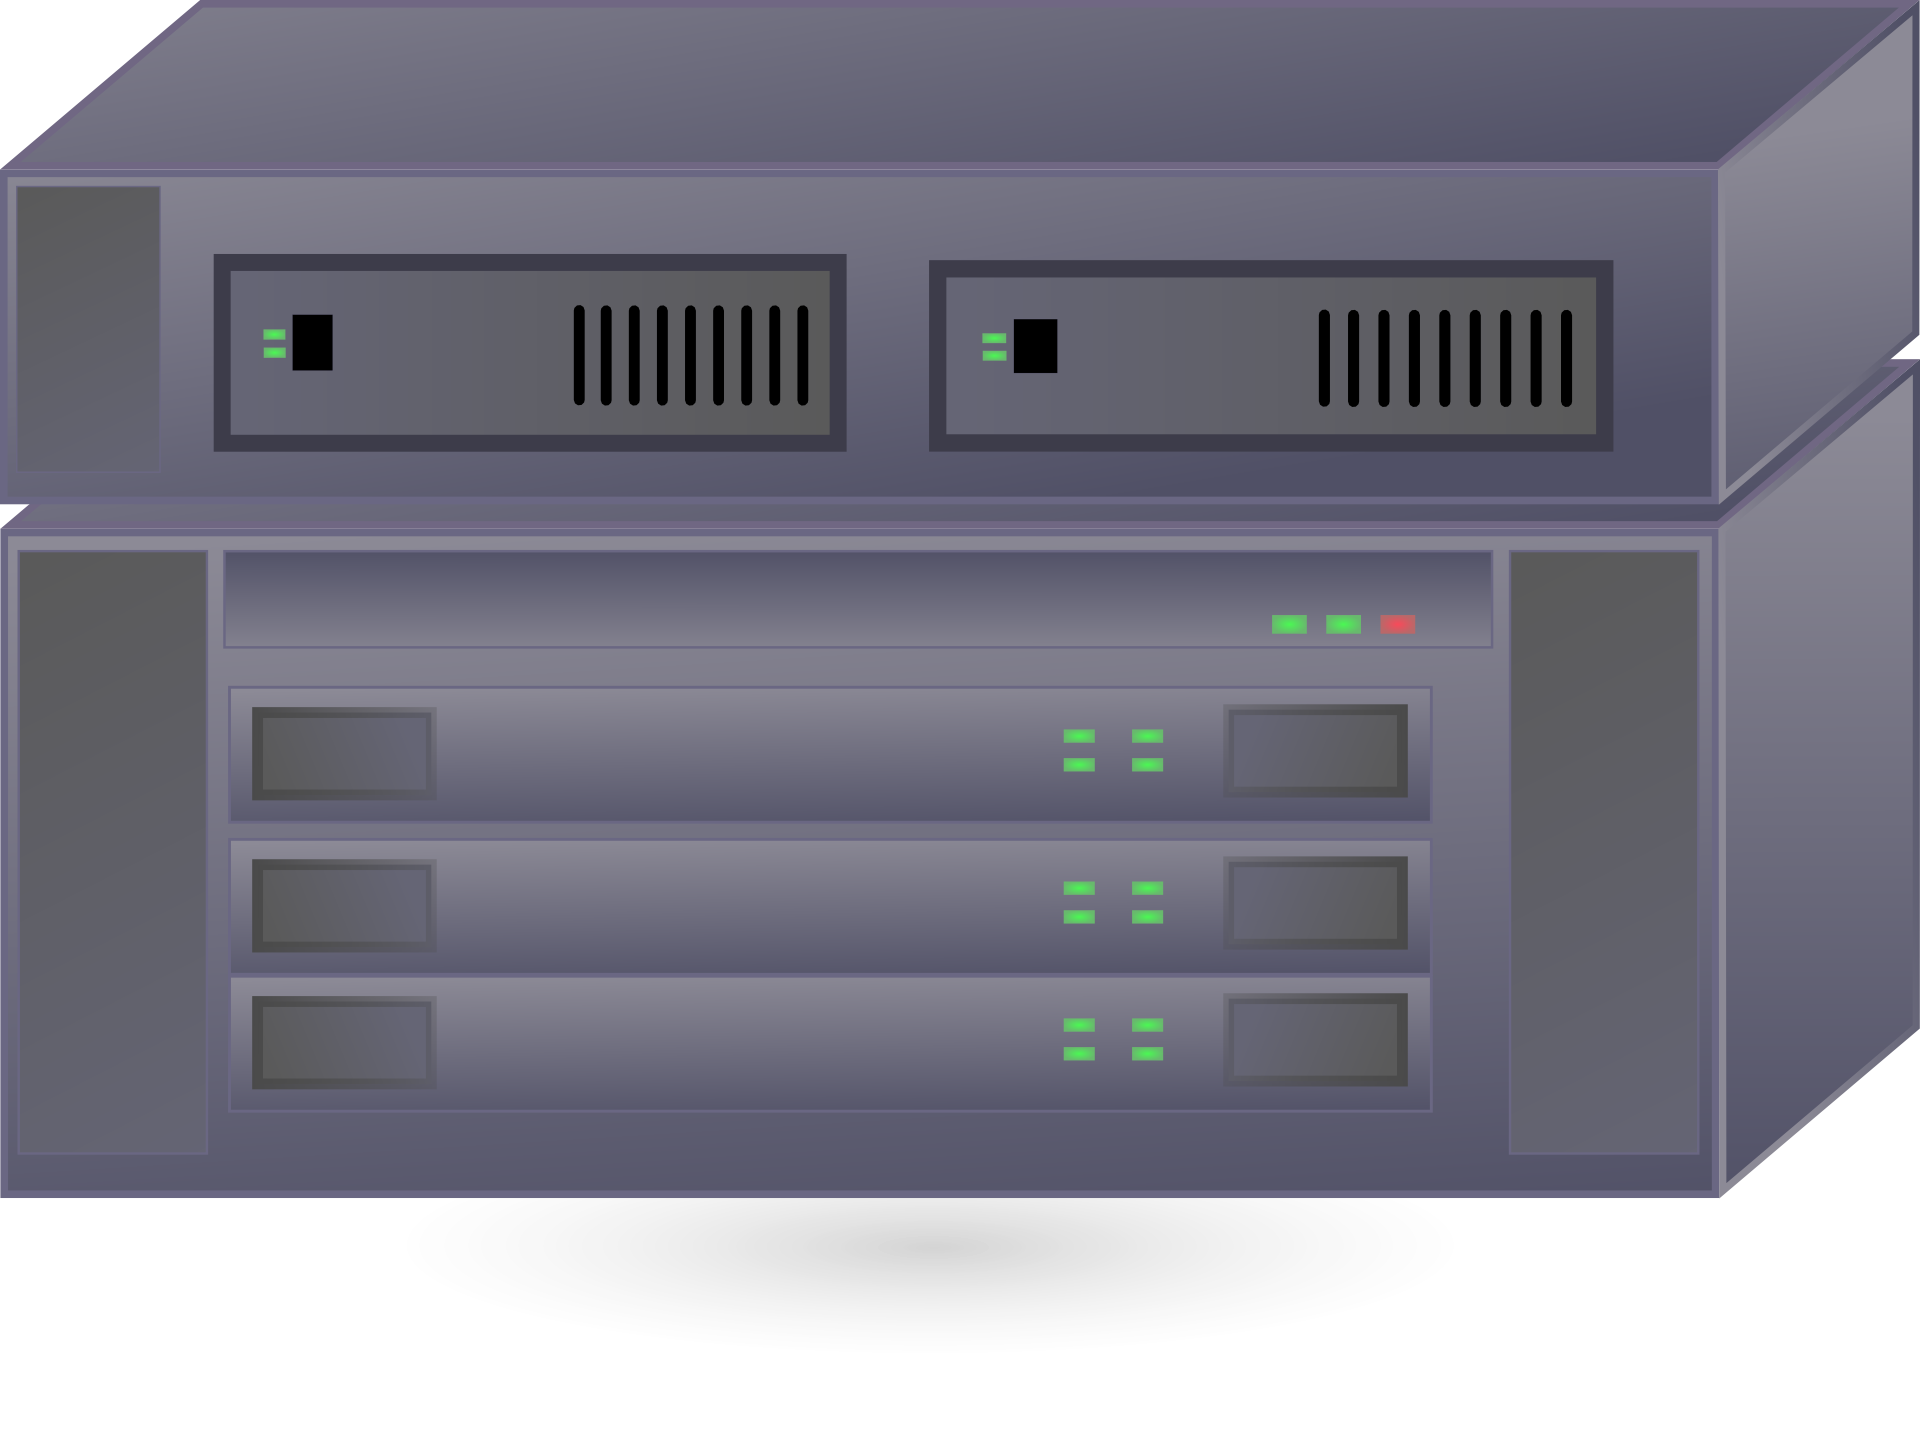 Server computer network drawing free image download